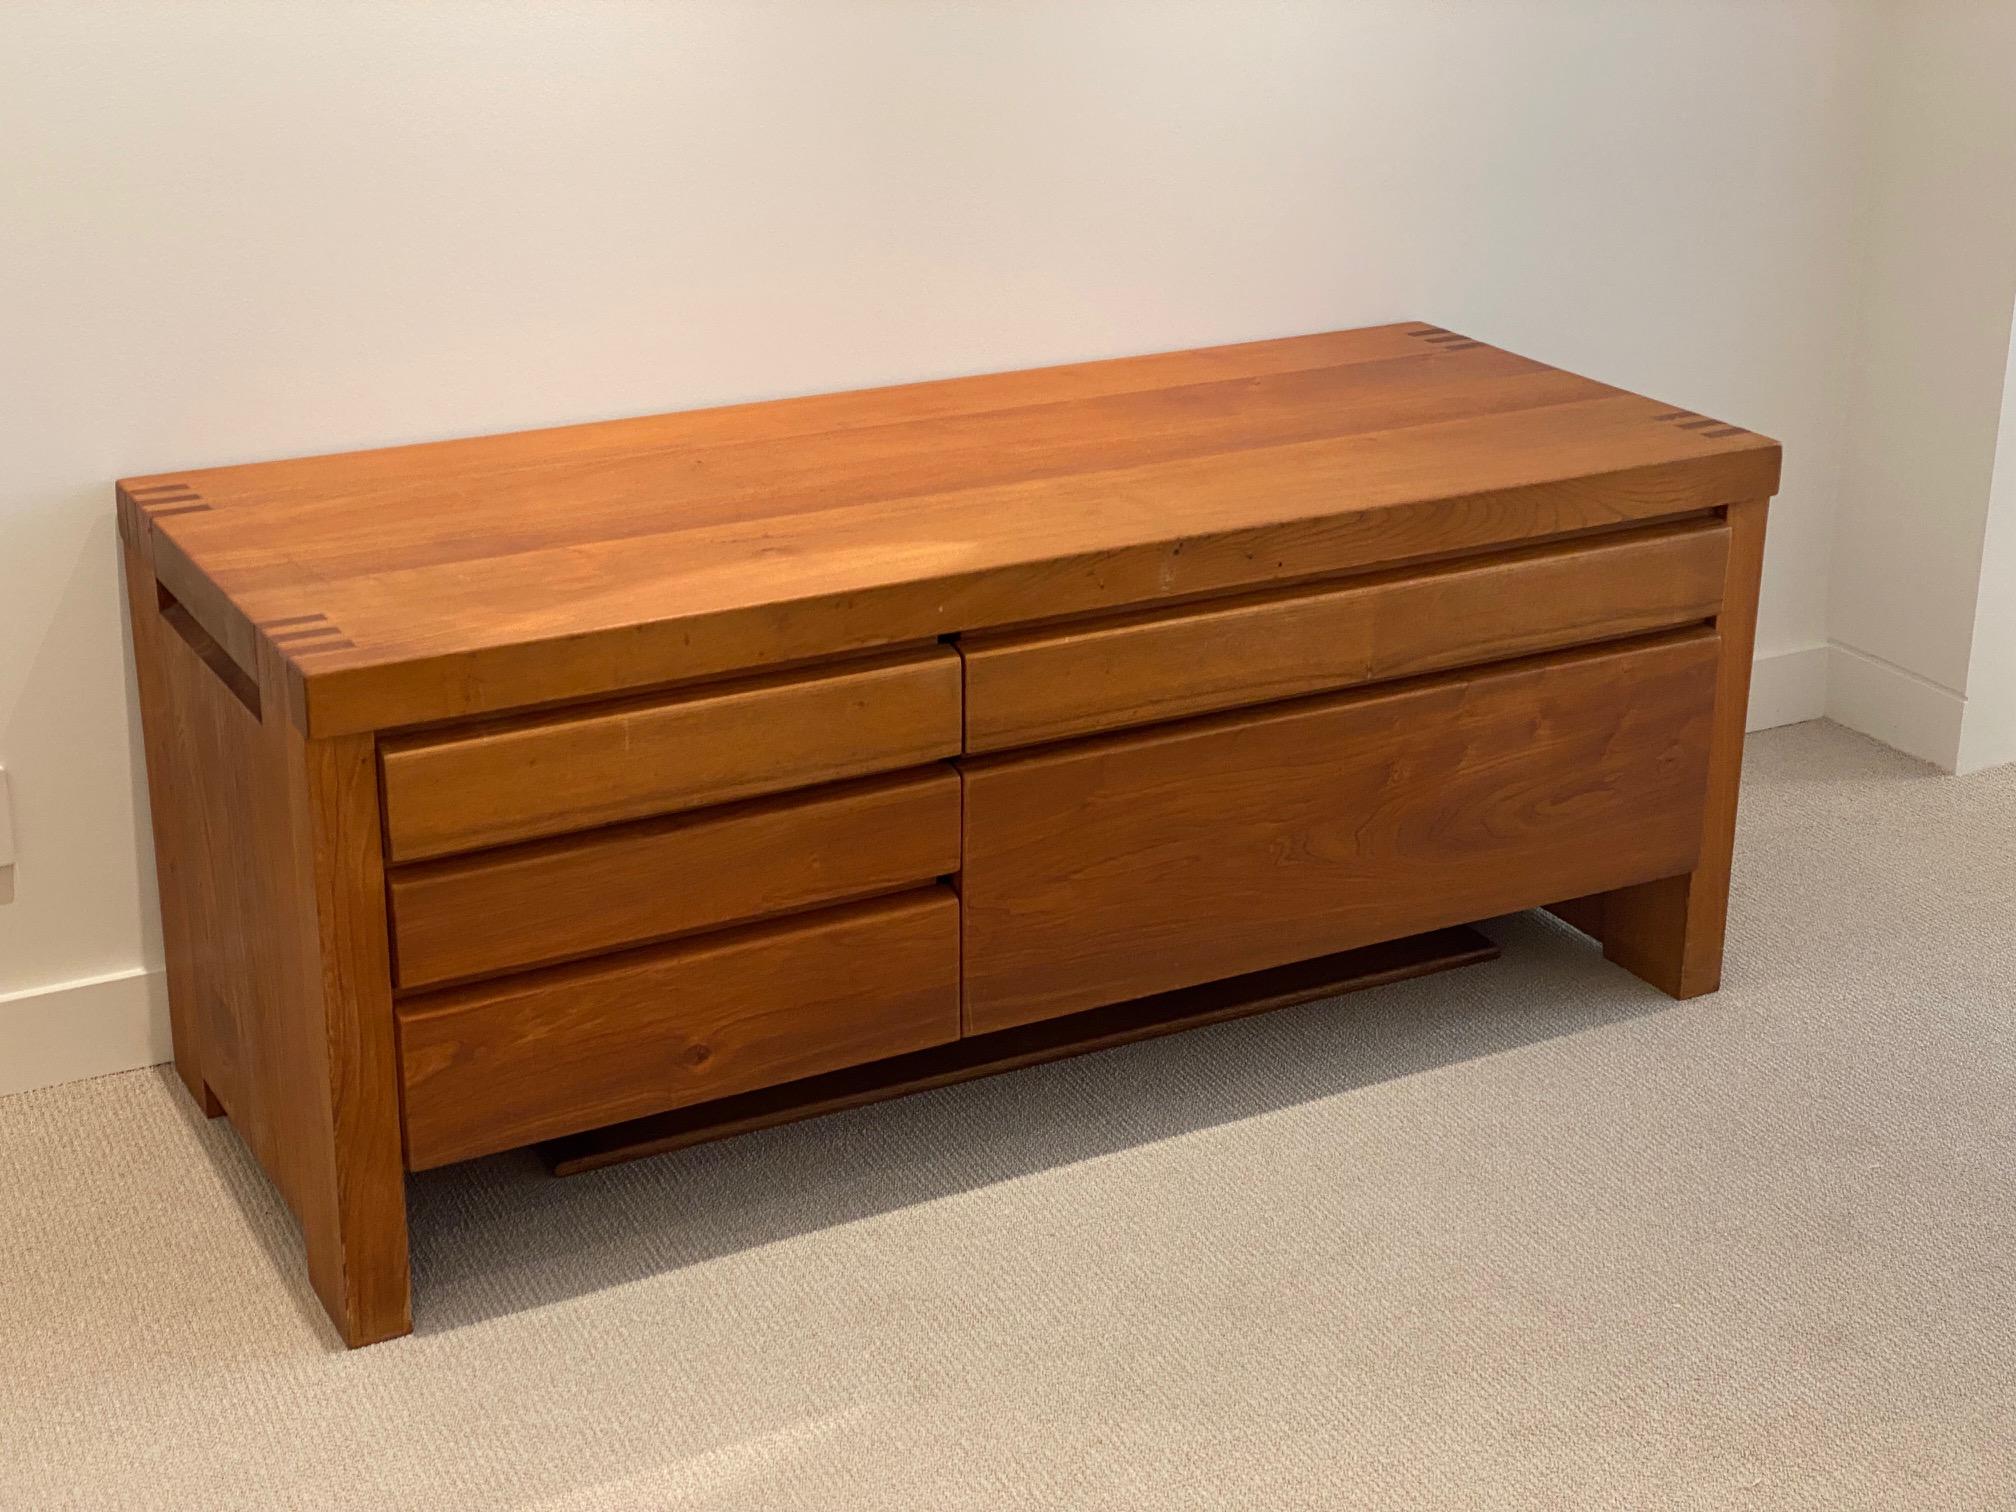 1960's solid elm French modern low commode reference B14 by Pierre Chapo (1927-1987).
Extremely well crafted, The piece is equipped with 5 drawers.